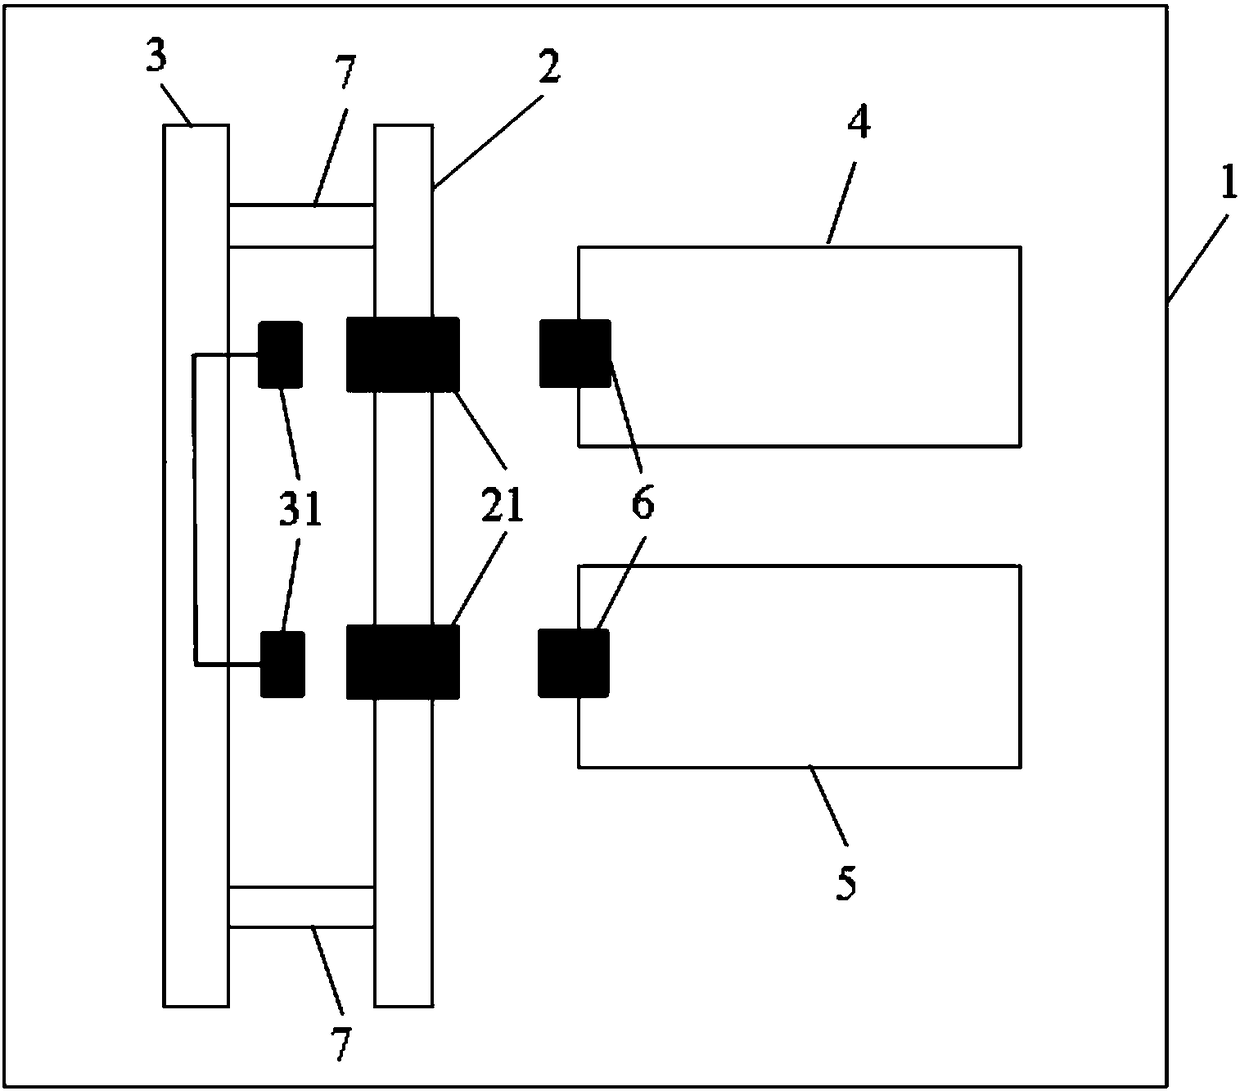 Optical backplane interconnect system